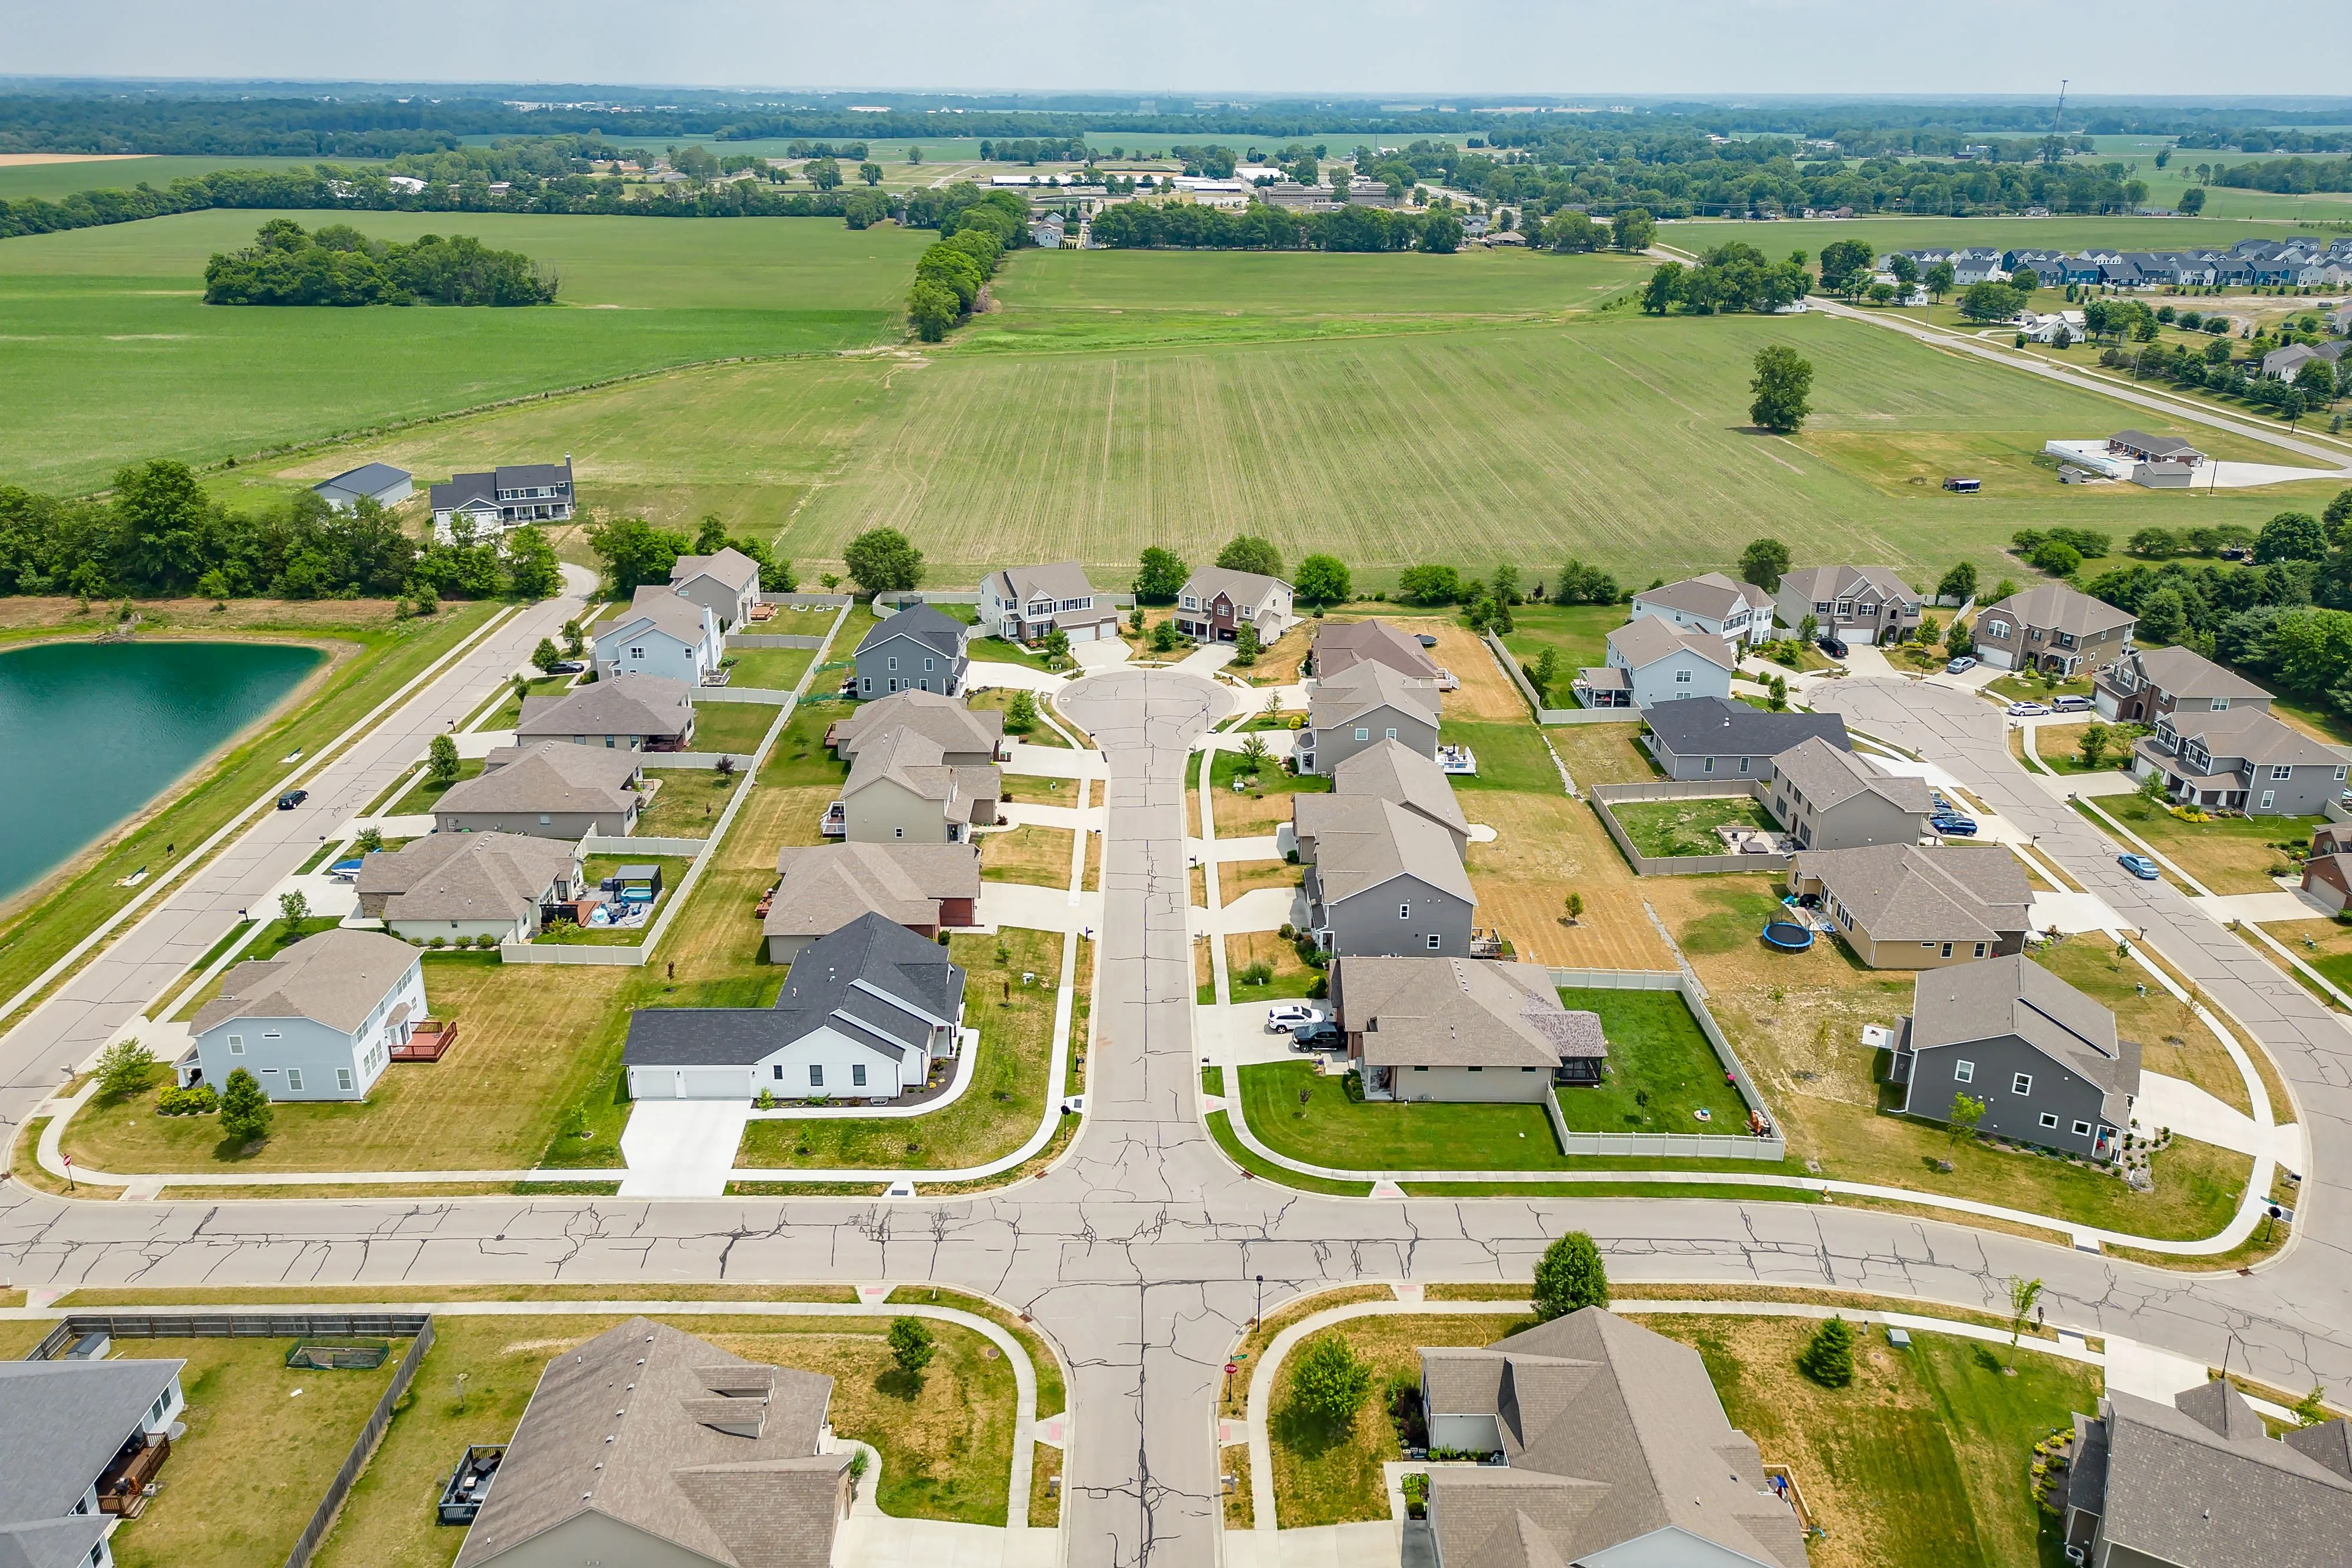 Aerial view of a suburban neighborhood with rows of houses, manicured lawns, and a small lake nearby.